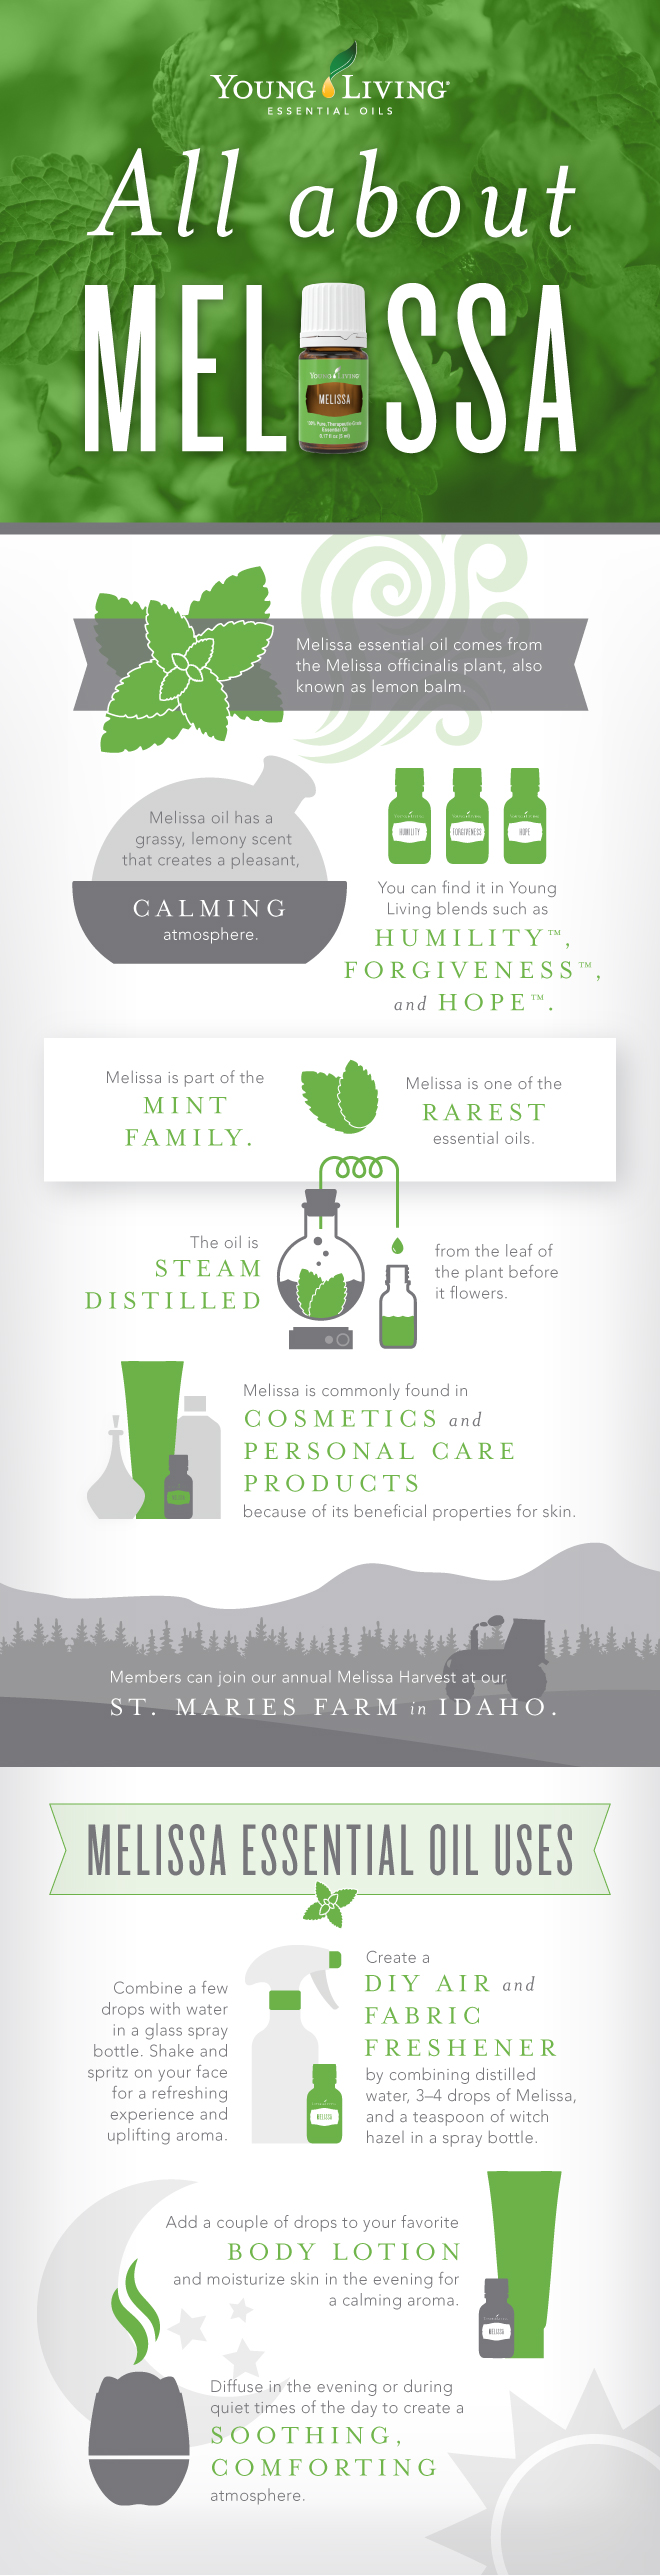 All About Melissa Essential Oil Infographic